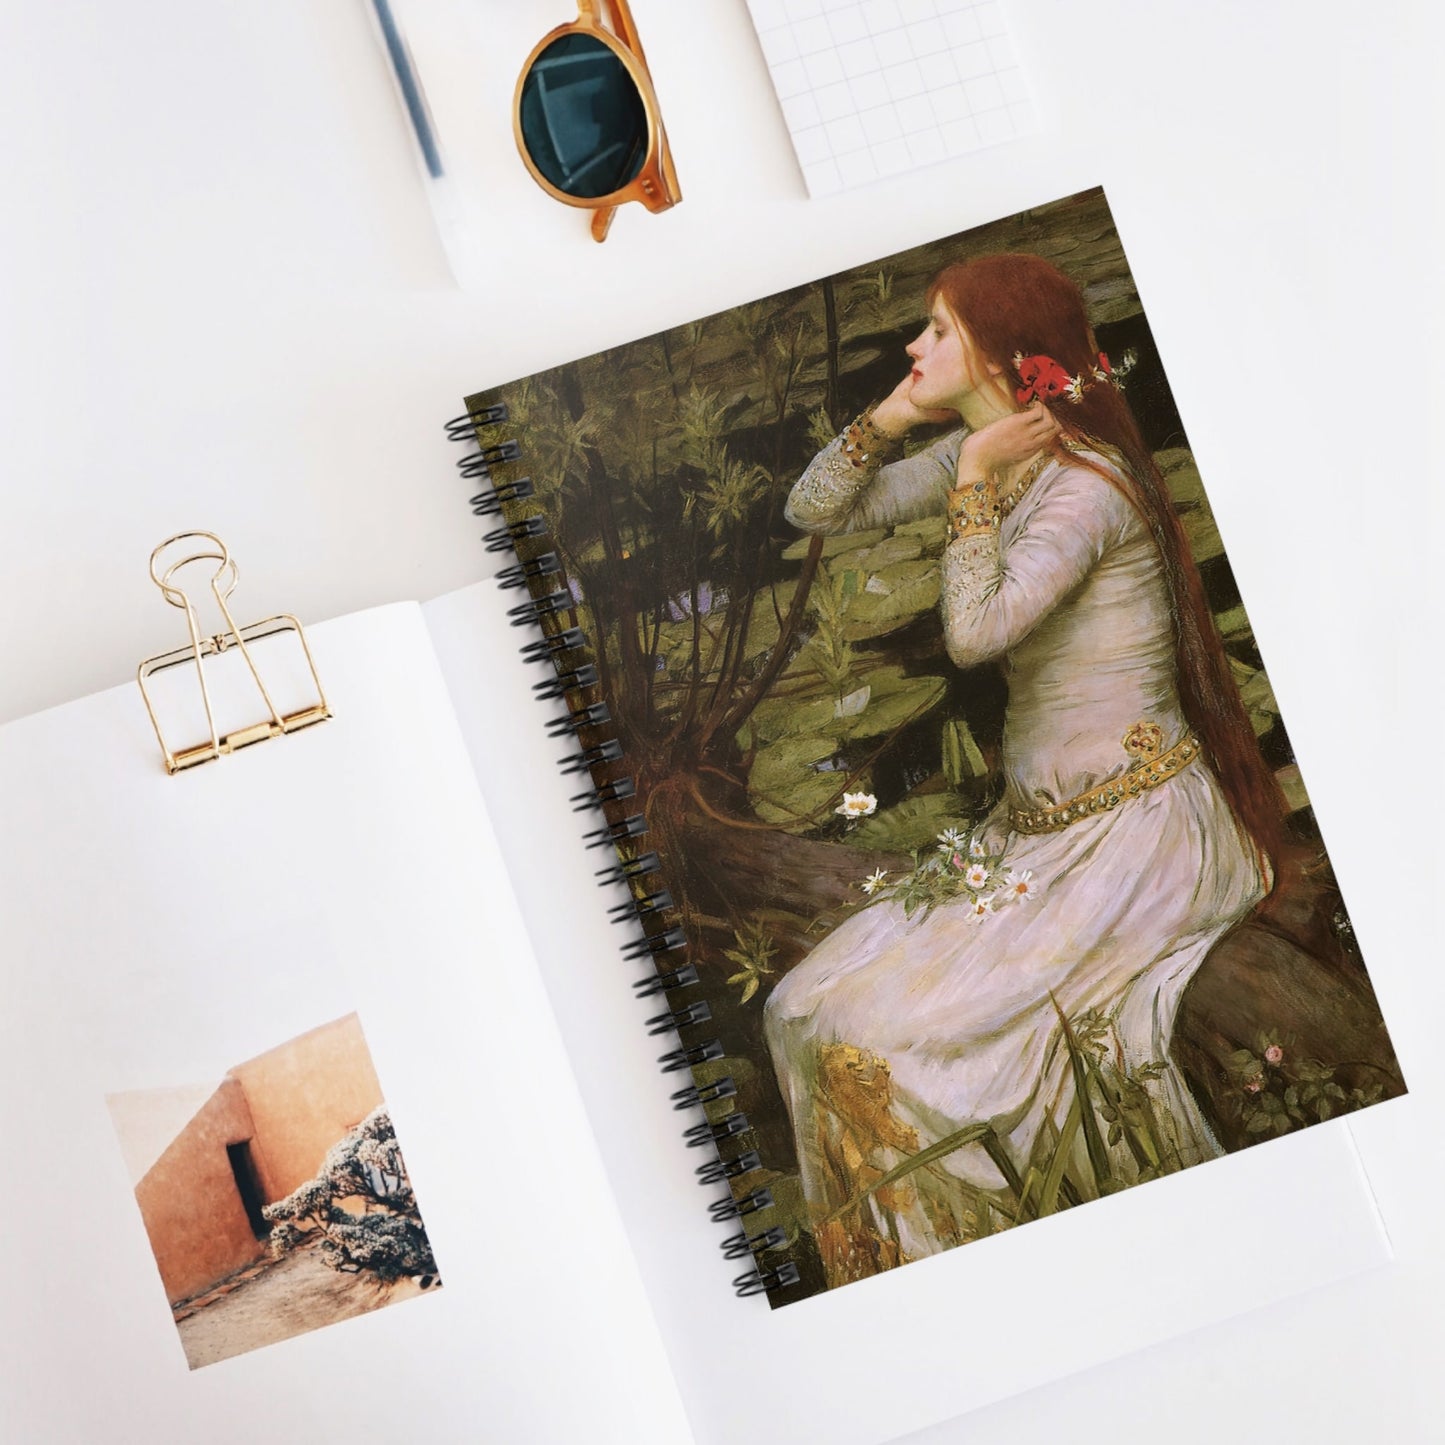 Victorian Aesthetic Spiral Notebook Displayed on Desk